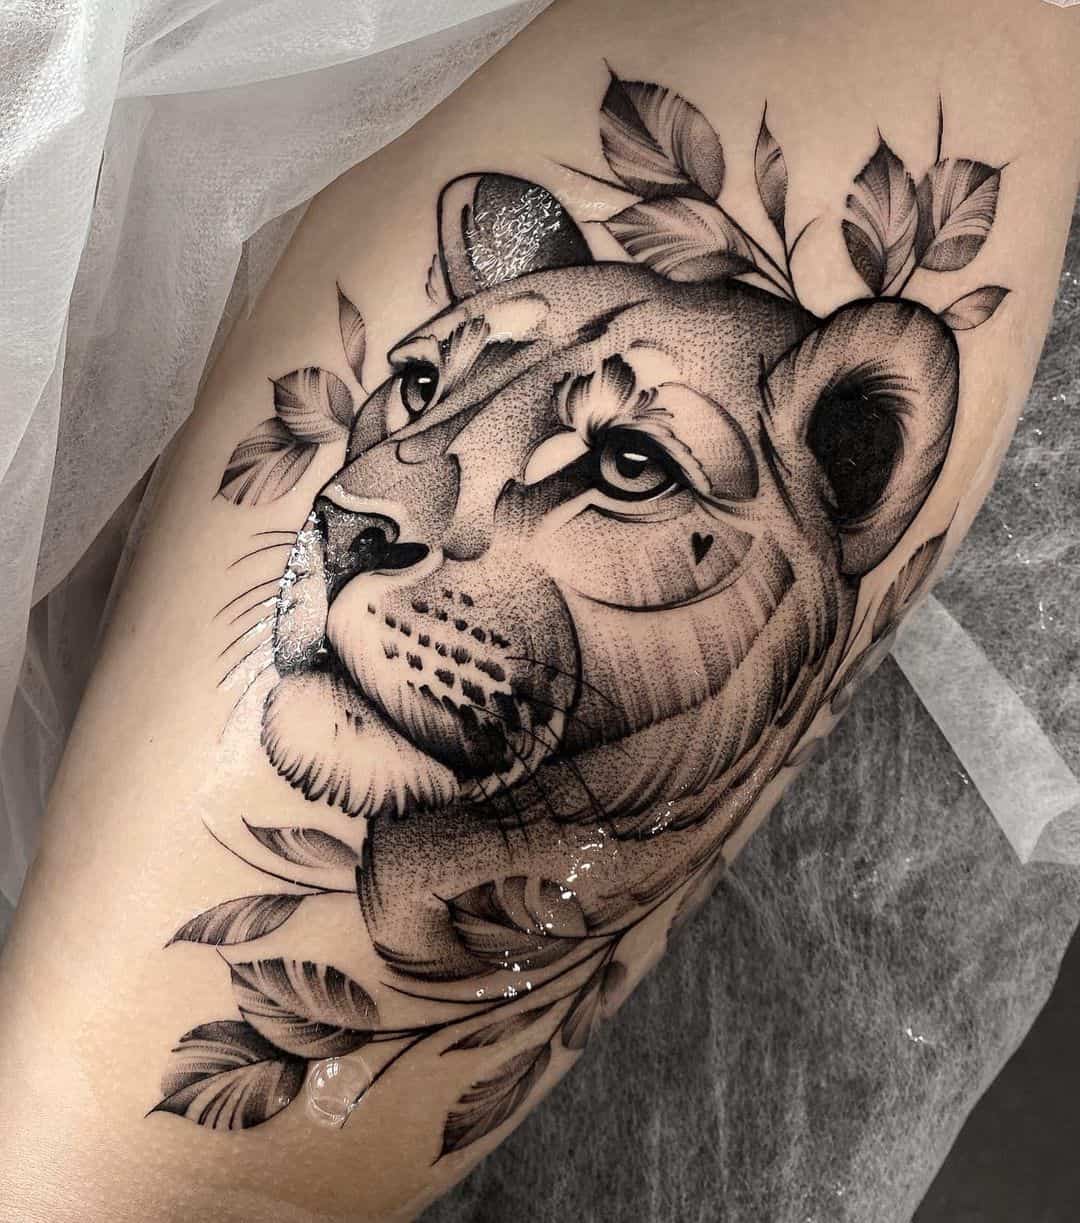 Amazing lioness tattoo by hiper.magdalena